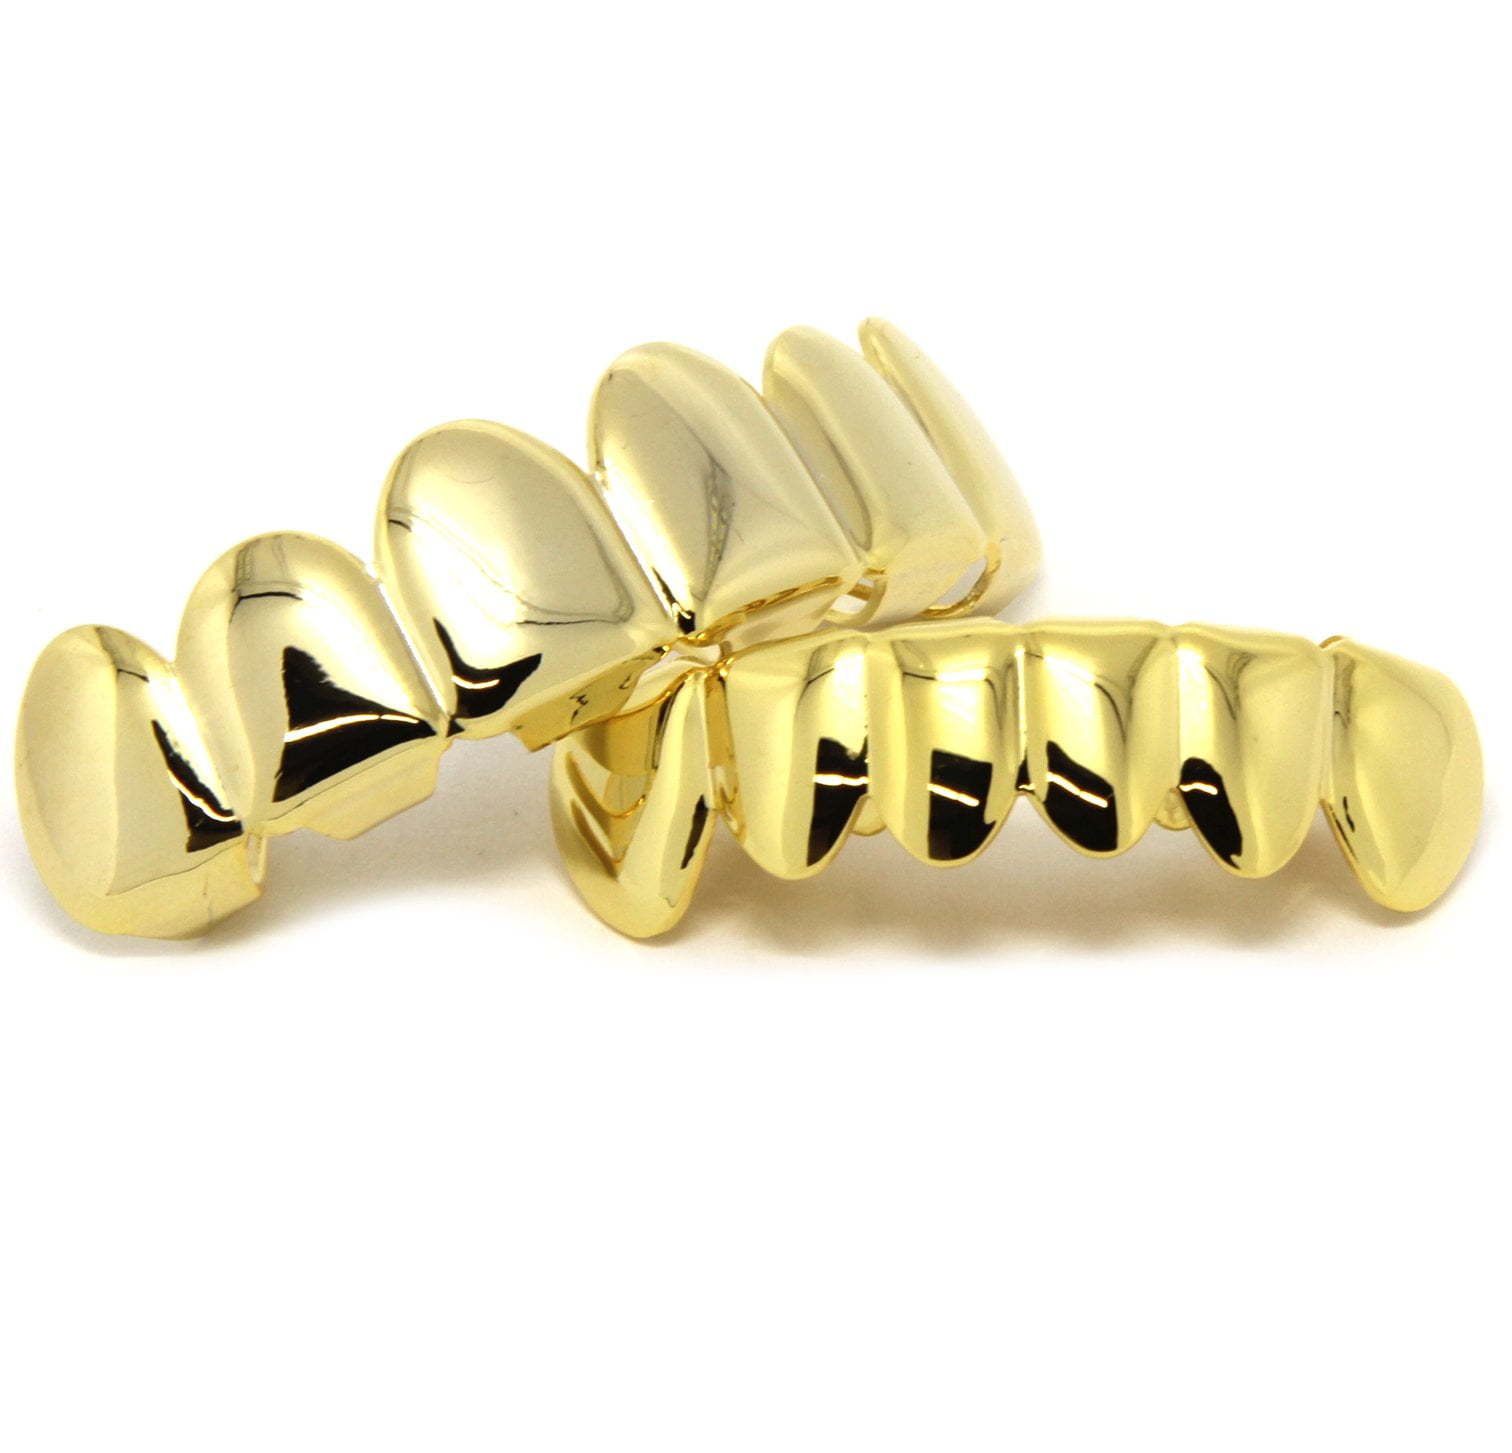 Diamond Grillz 24K Plated Gold For Mouth Top Bottom Hip Hop Teeth Grills For Tee 